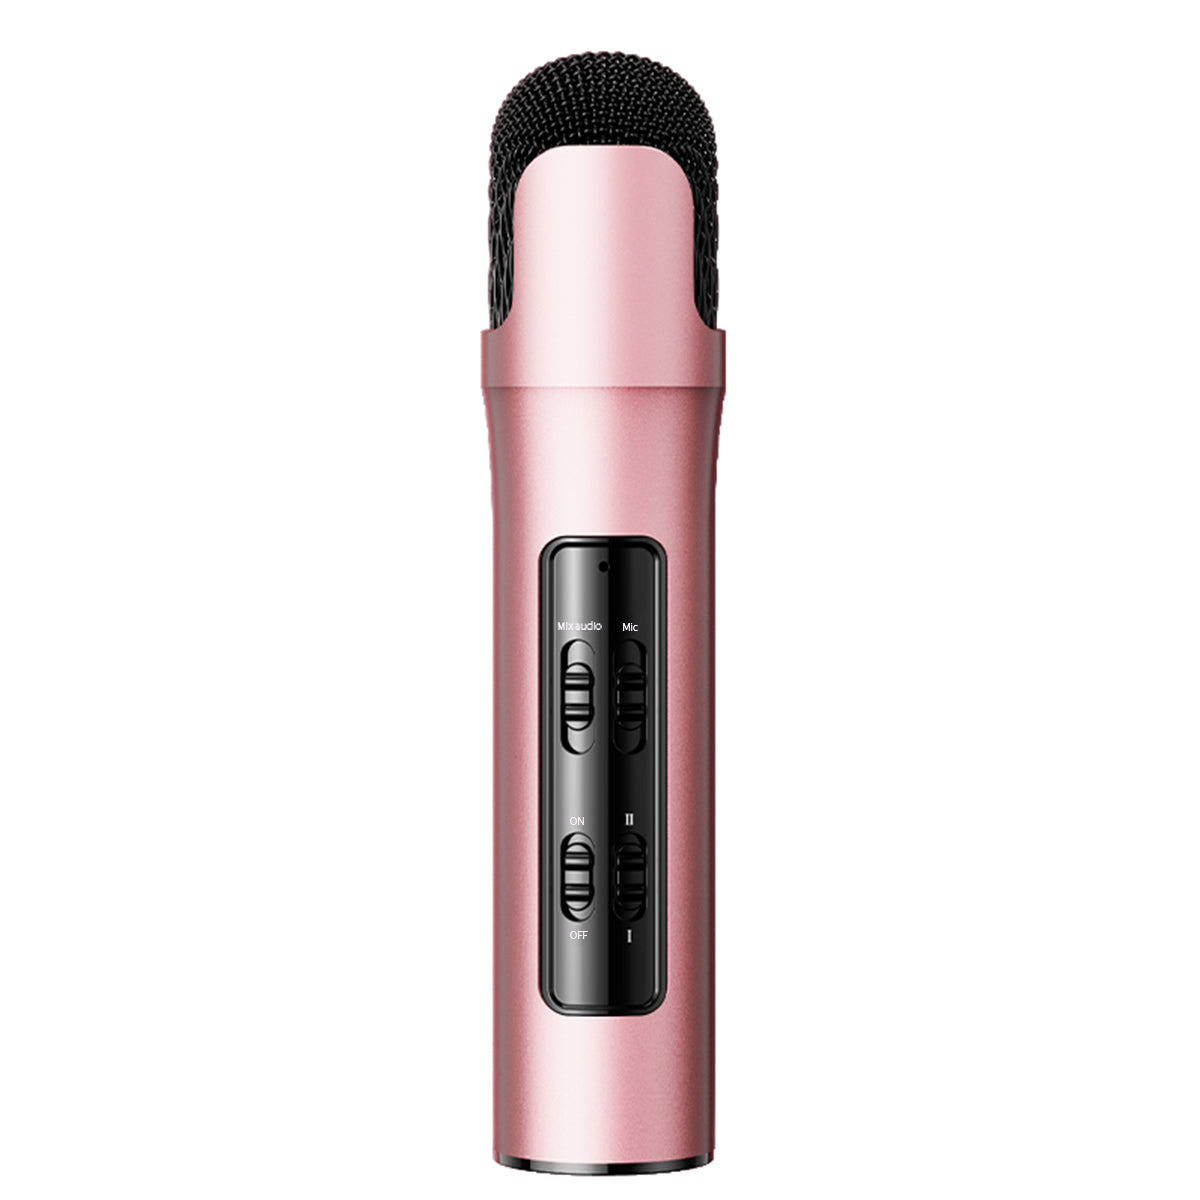 Nowmic Aluminum Alloy Body Professional Recording Microphone